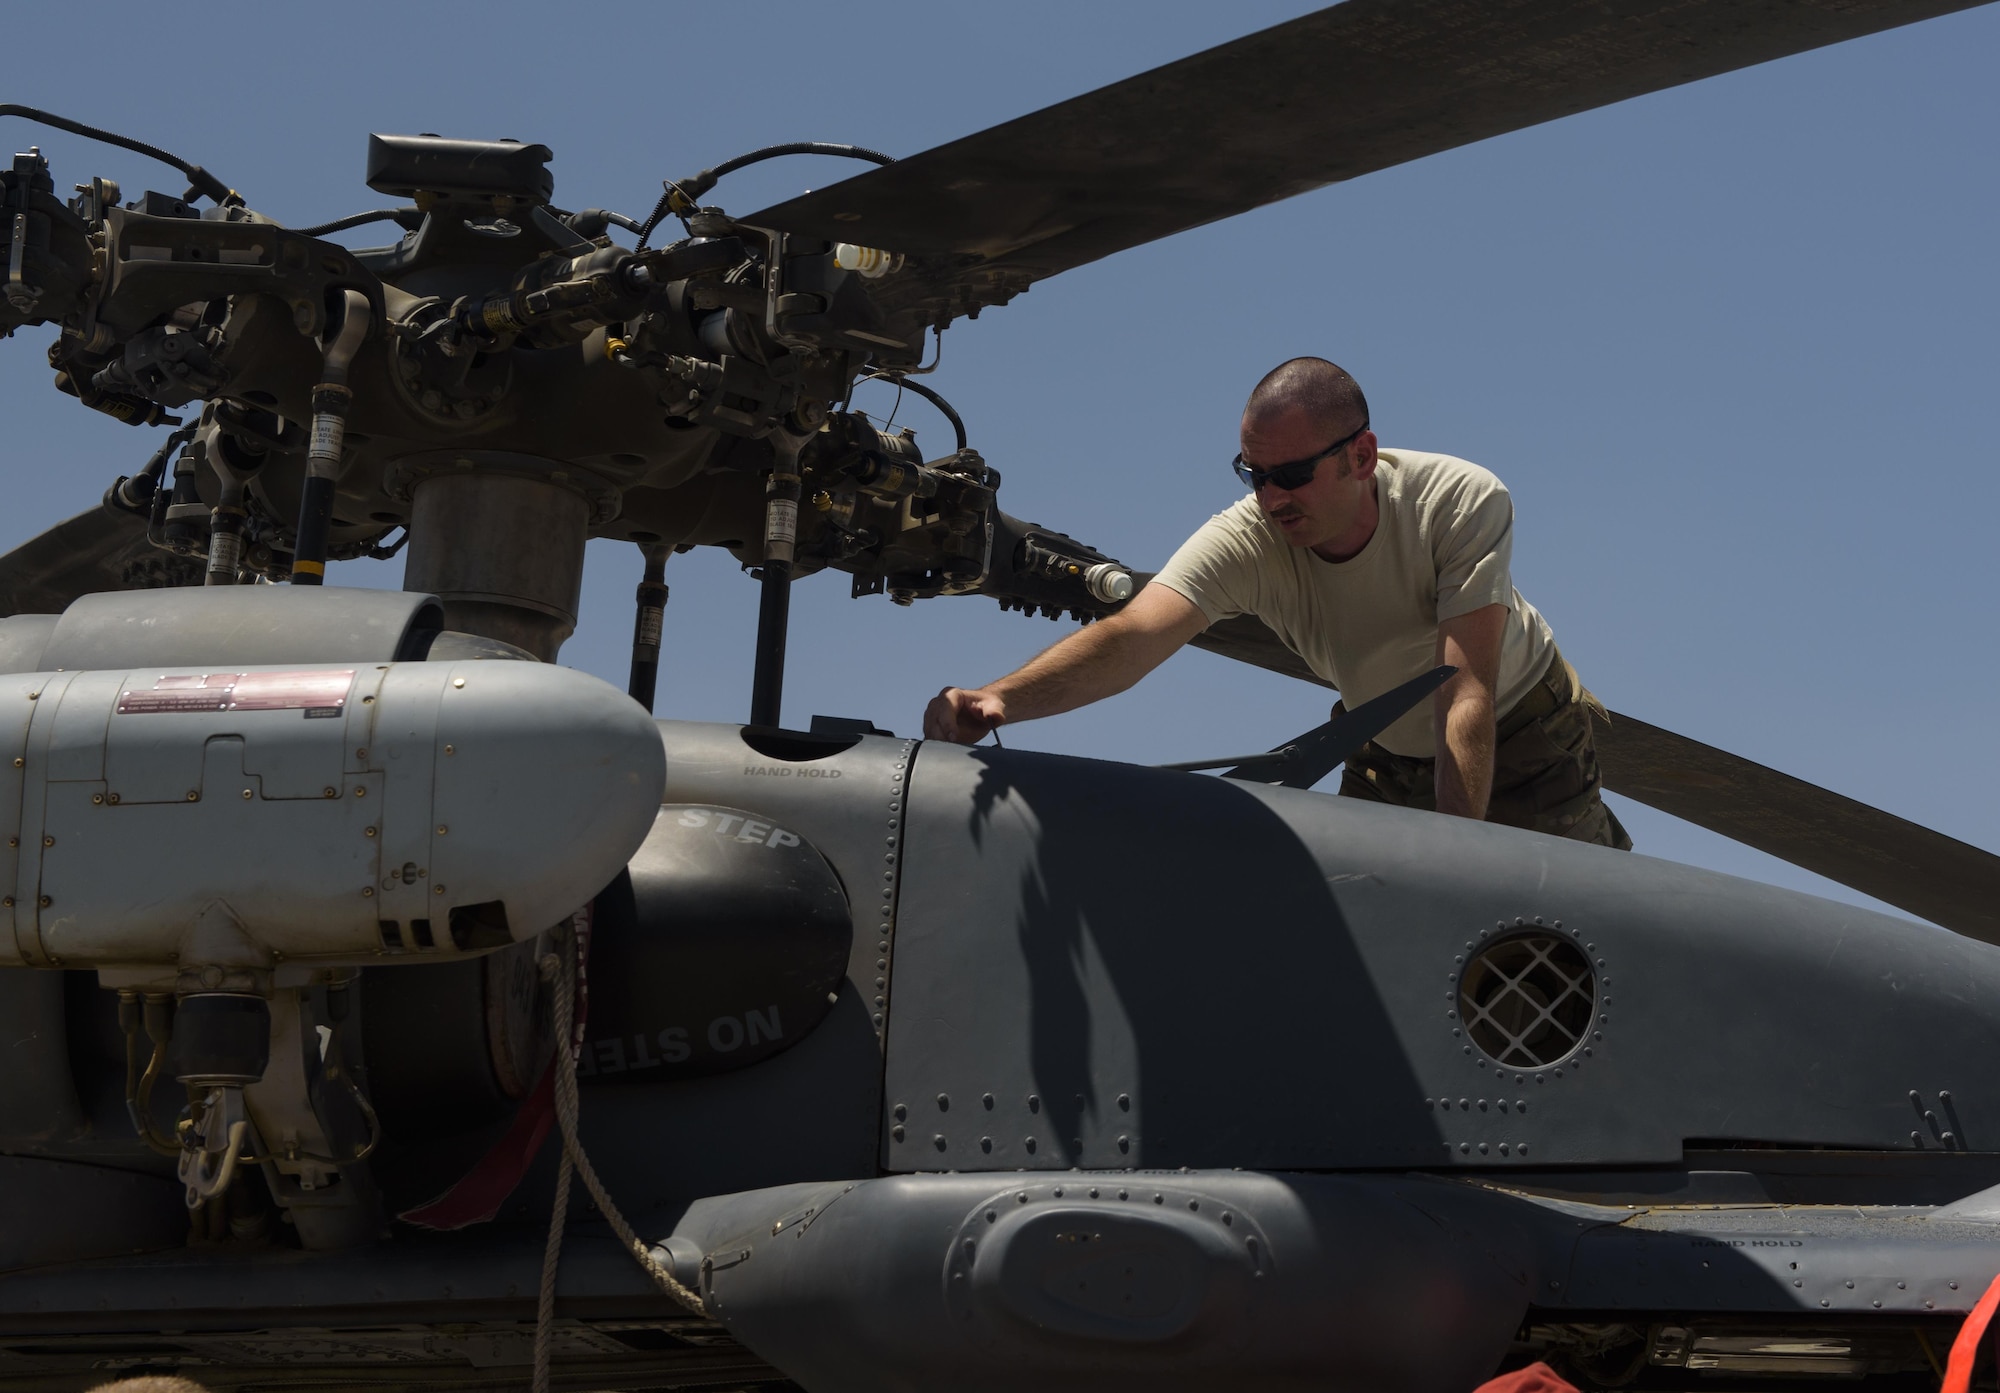 An Airman from the 83rd Expeditionary Rescue Squadron conducts routine maintenance on the HH-60G Pave Hawk on Bagram Airfield, Afghanistan, July 4, 2017. The 83rd ERQS is on-call at all times, never knowing when they might receive the call to rescue ground troops in need of urgent medical care. The maintainers and aircrew ensure the HH-60 is ready at all times for when that call does come in. (U.S. Air Force photo by Staff Sgt. Benjamin Gonsier)